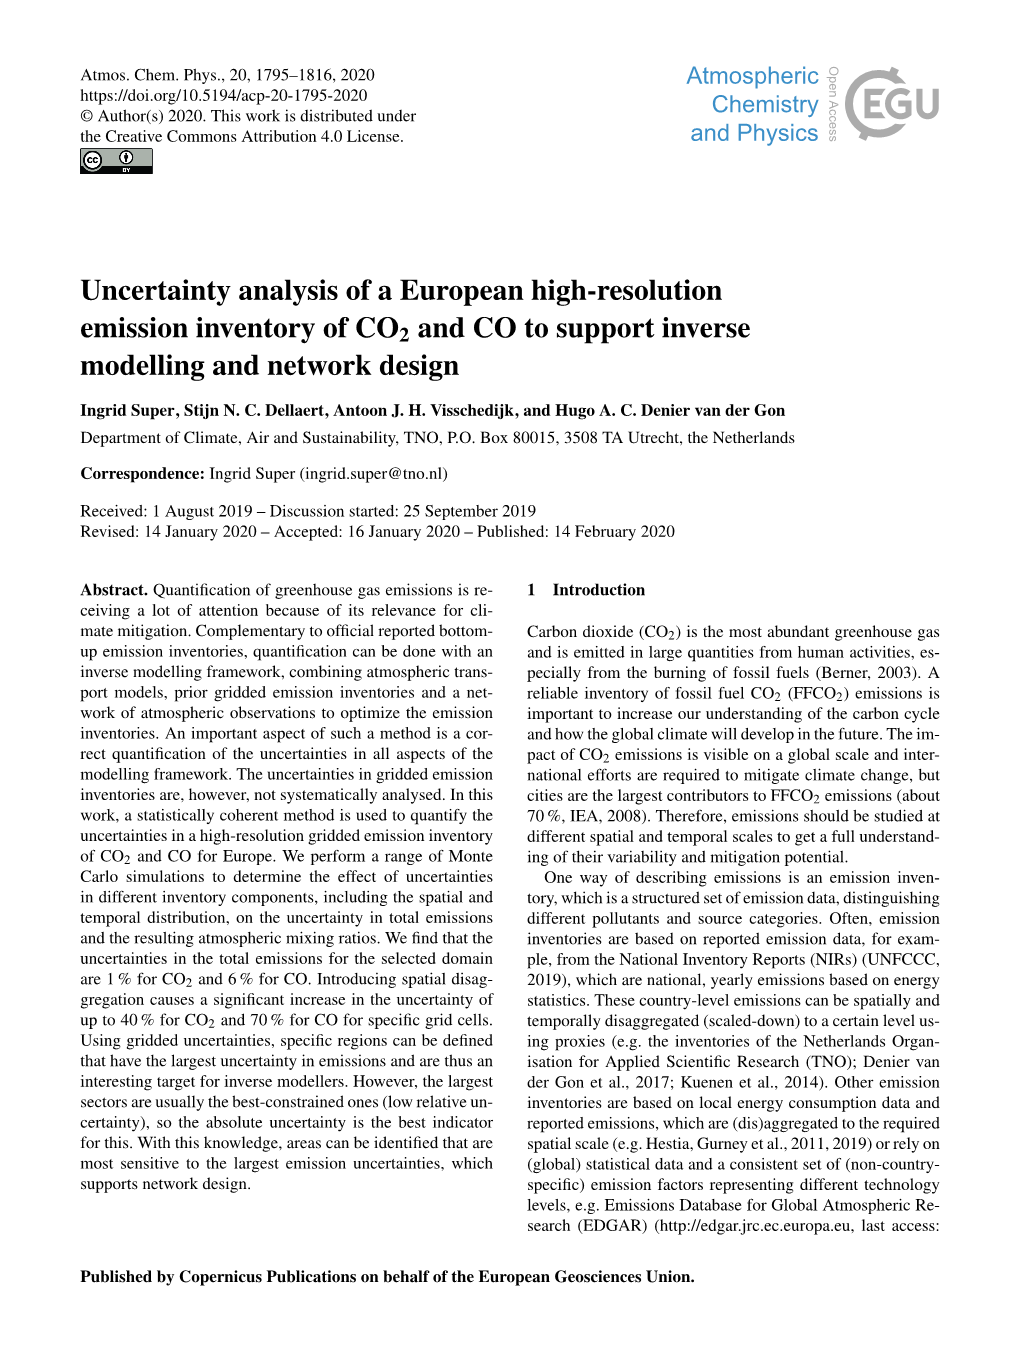 Uncertainty Analysis of a European High-Resolution Emission Inventory of CO2 and CO to Support Inverse Modelling and Network Design